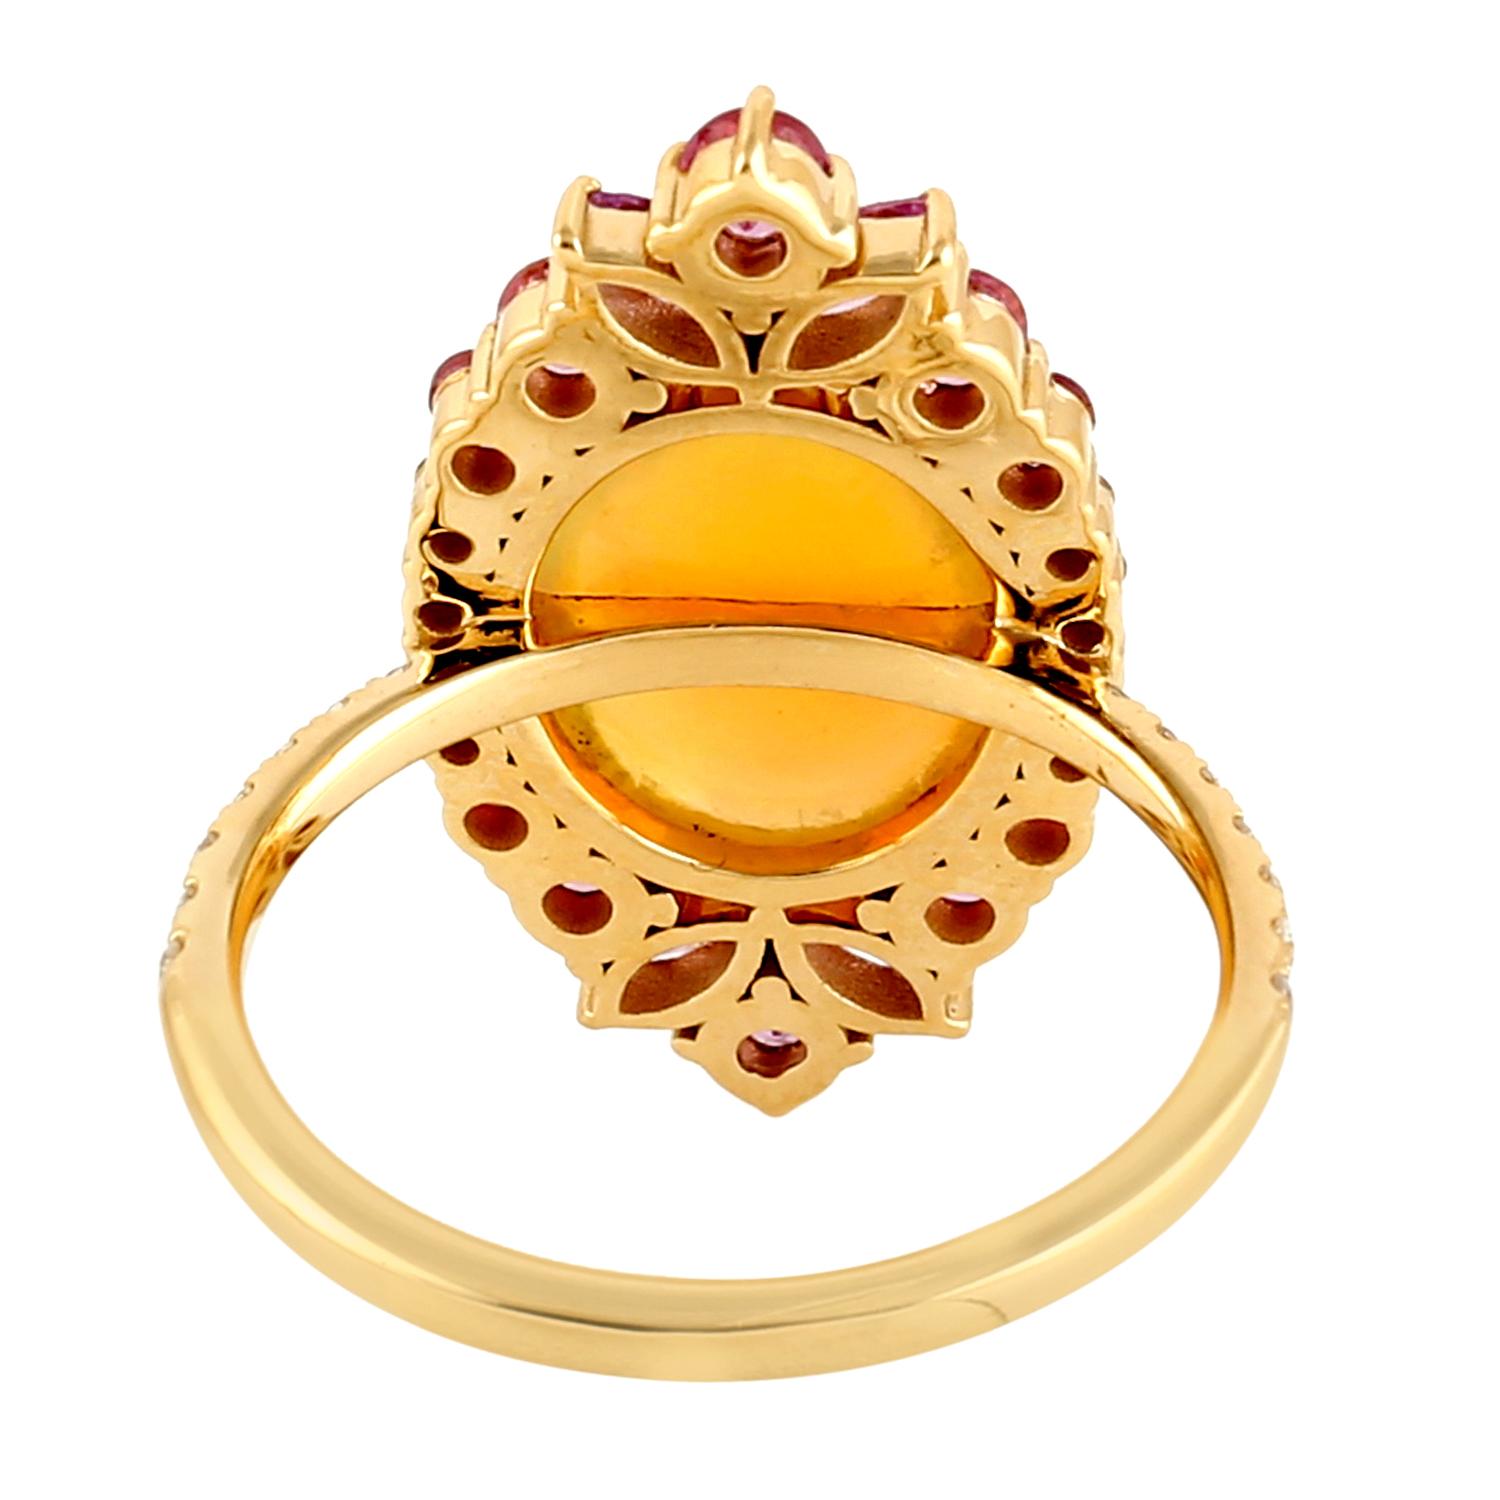 This ring has been meticulously crafted from 14-karat gold.  It is hand set with 2.97 carat Ethiopian opal, 1.36 carats sapphire & .25 carats of sparkling diamonds. 

The ring is a size 7 and may be resized to larger or smaller upon request. 
FOLLOW